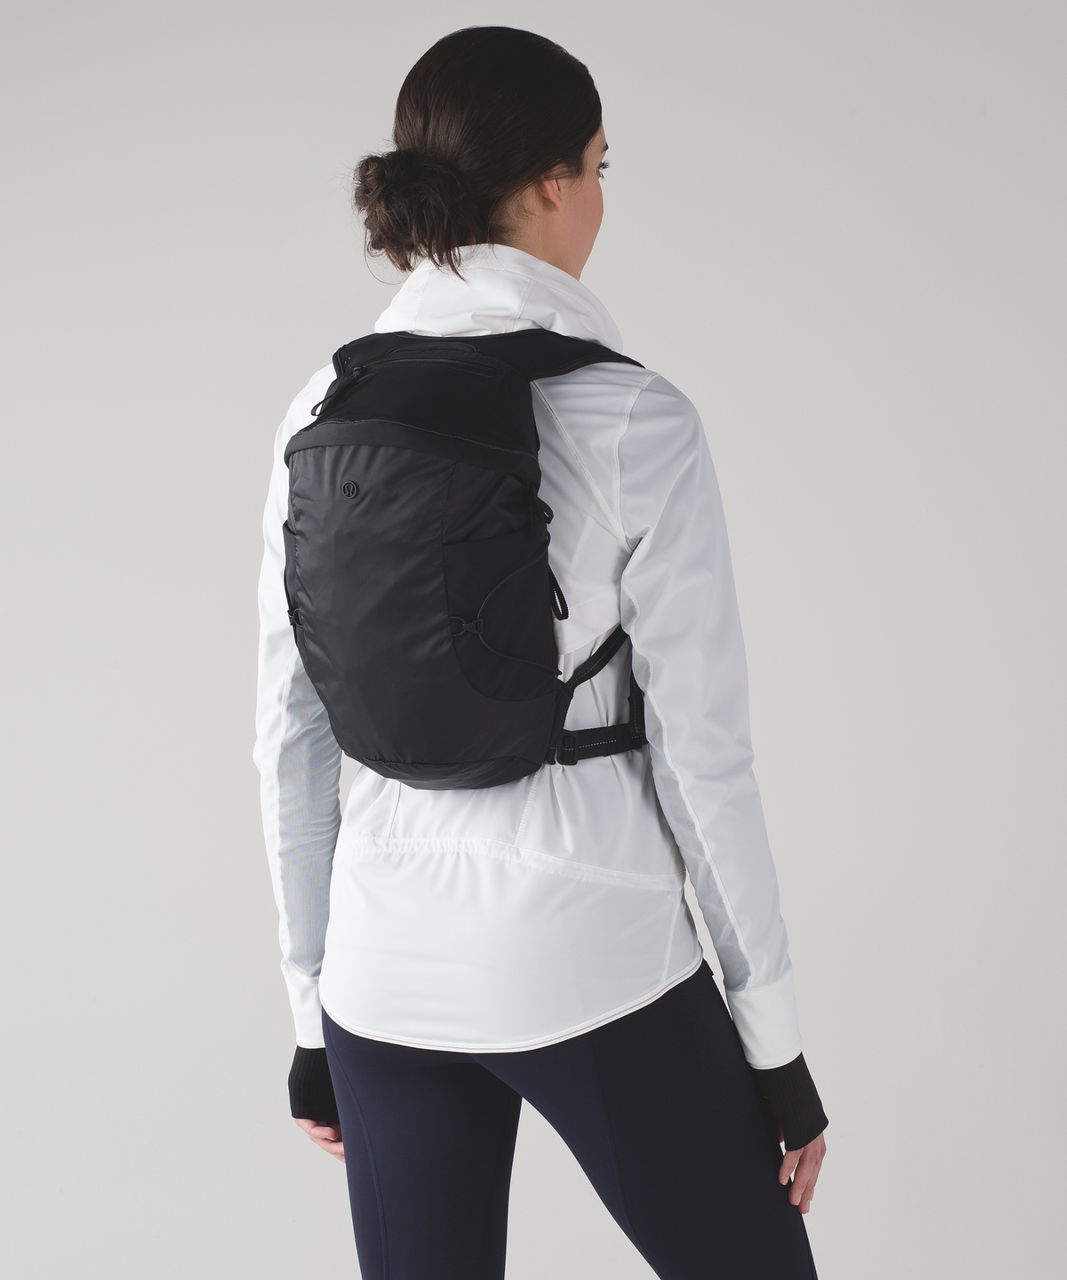 Lululemon Run All Day Backpack II *13L - Black (First Release)